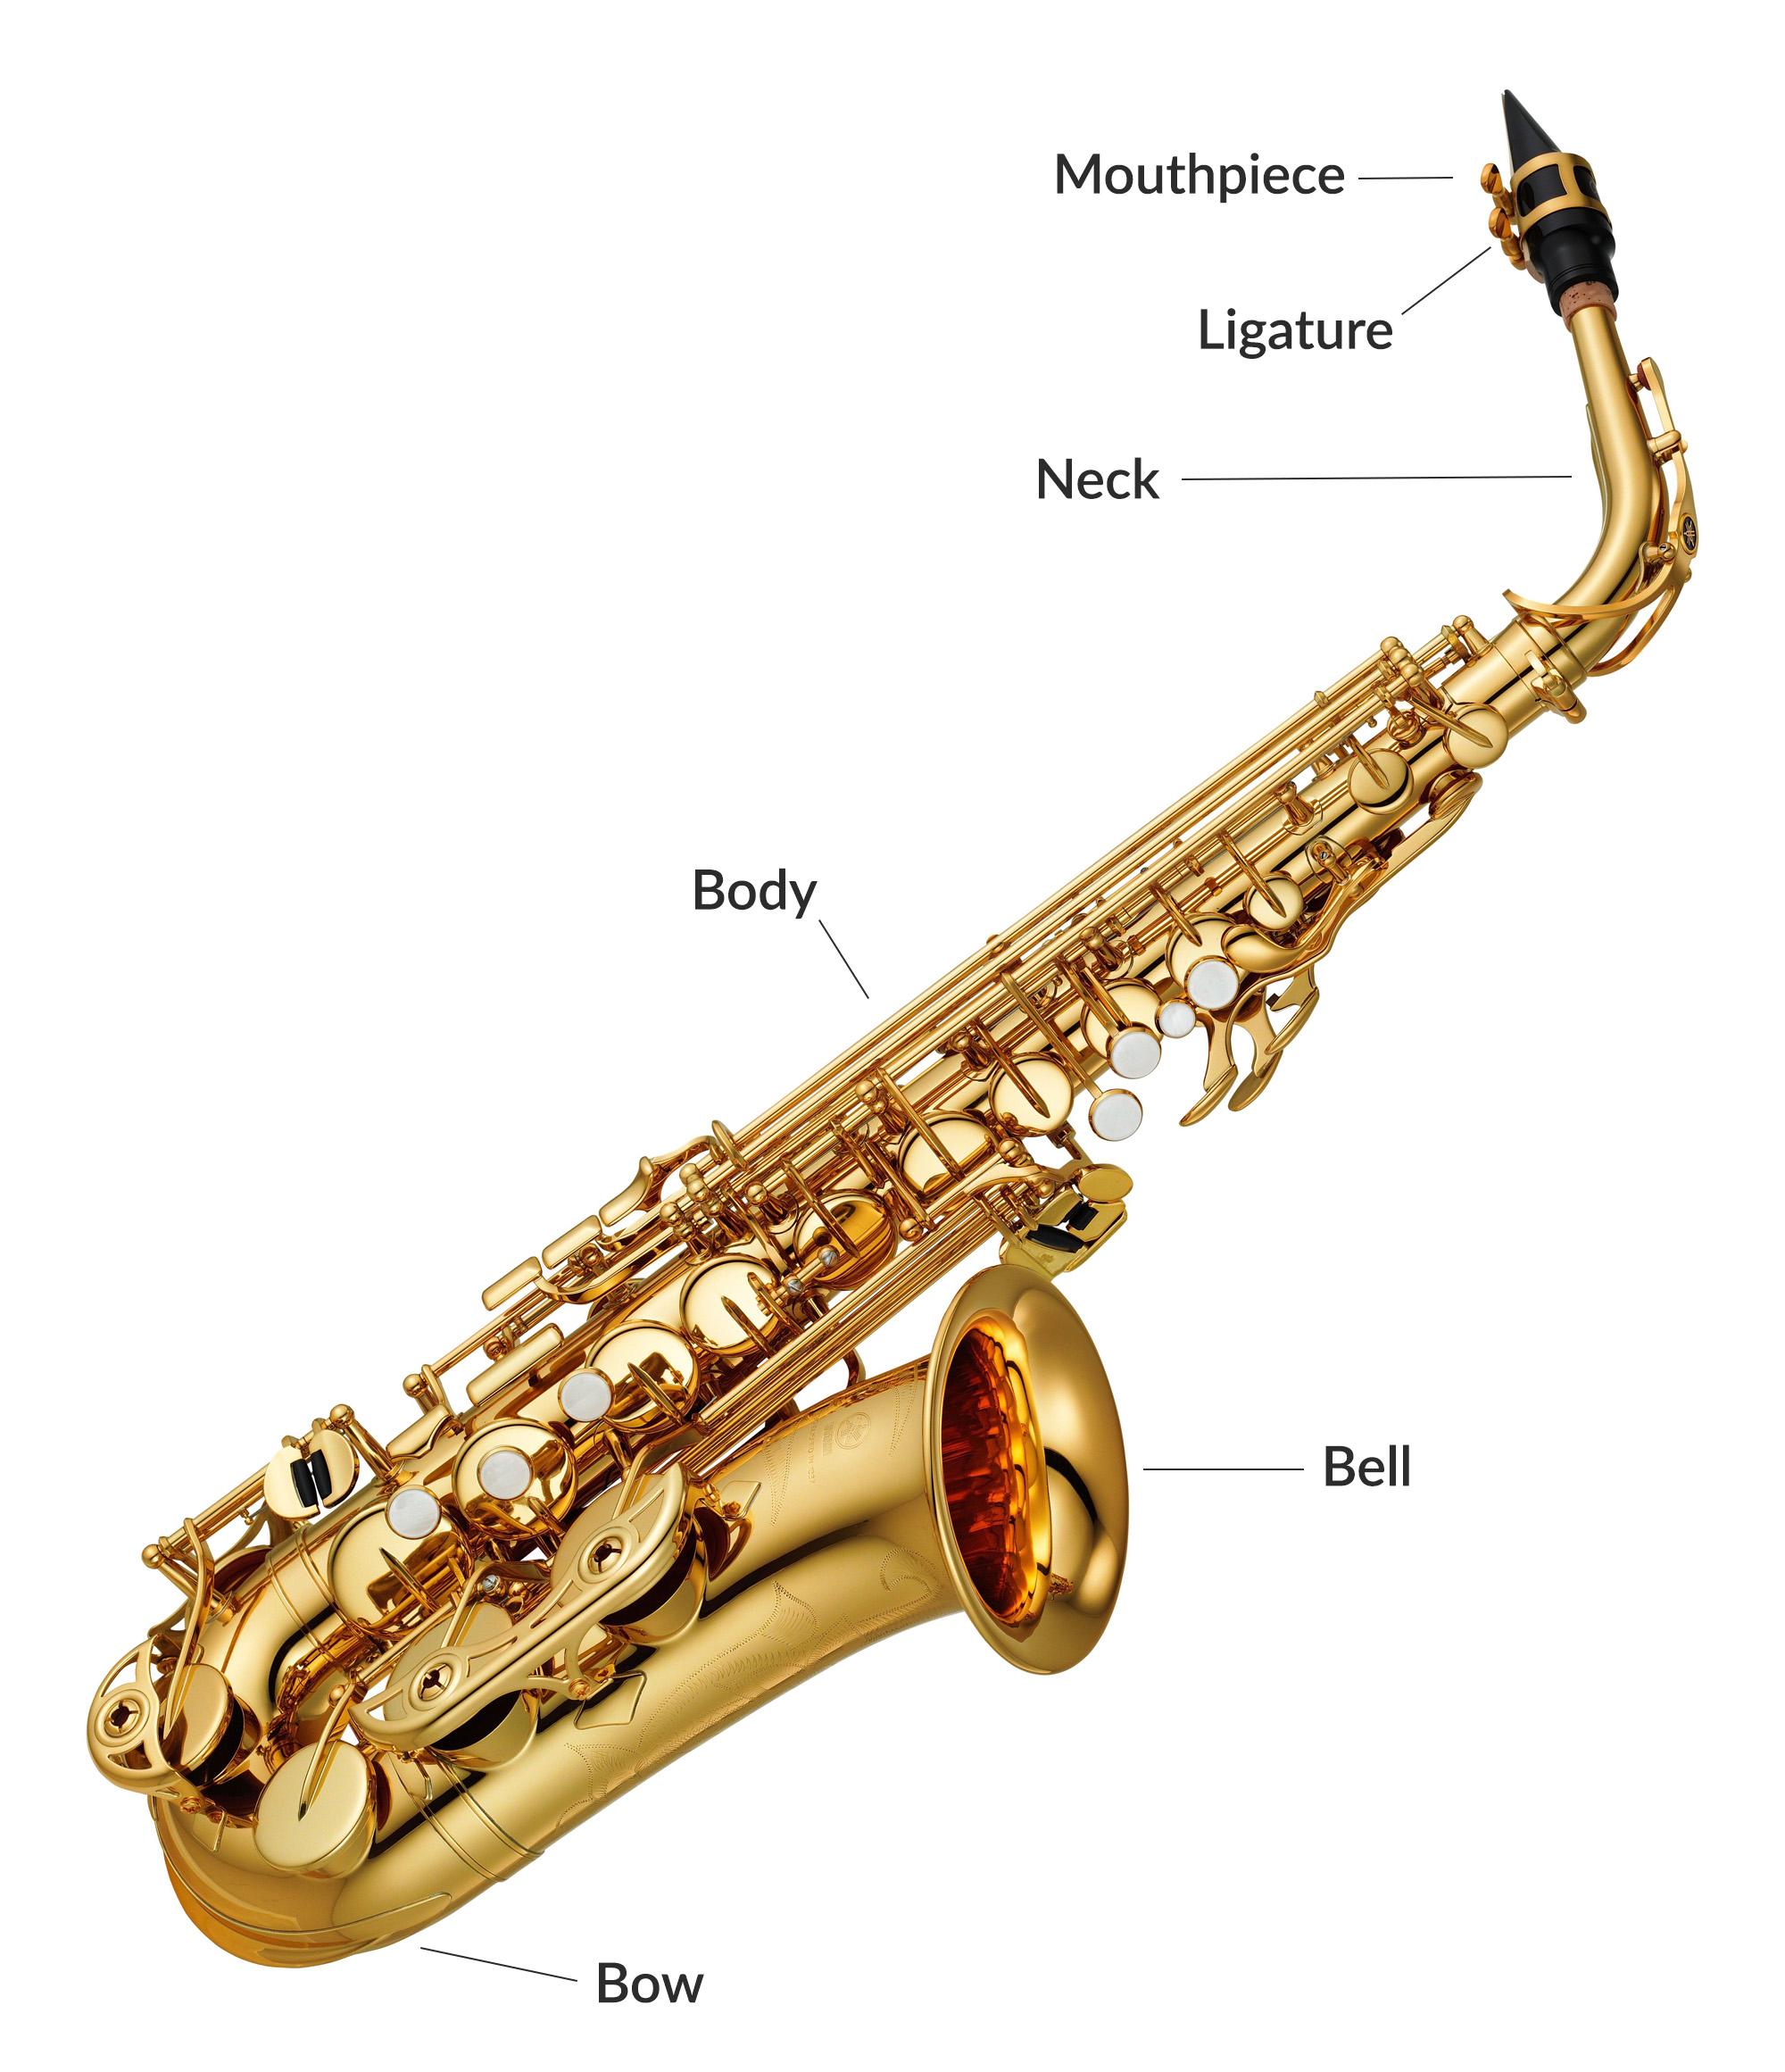 The different sections of an Alto Saxophone